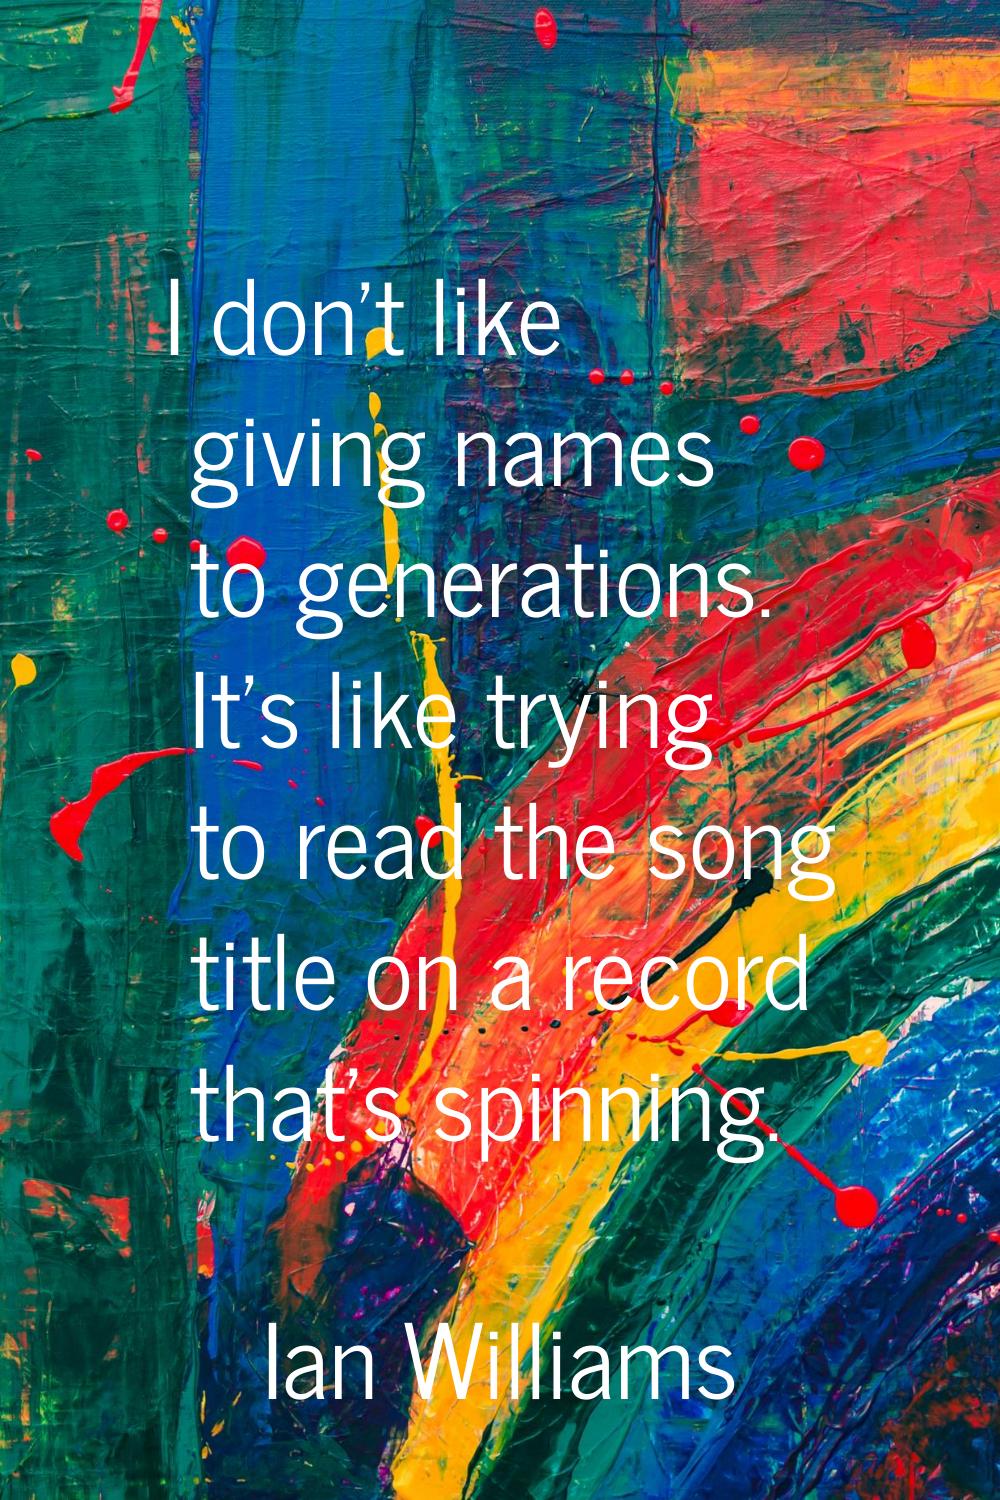 I don't like giving names to generations. It's like trying to read the song title on a record that'